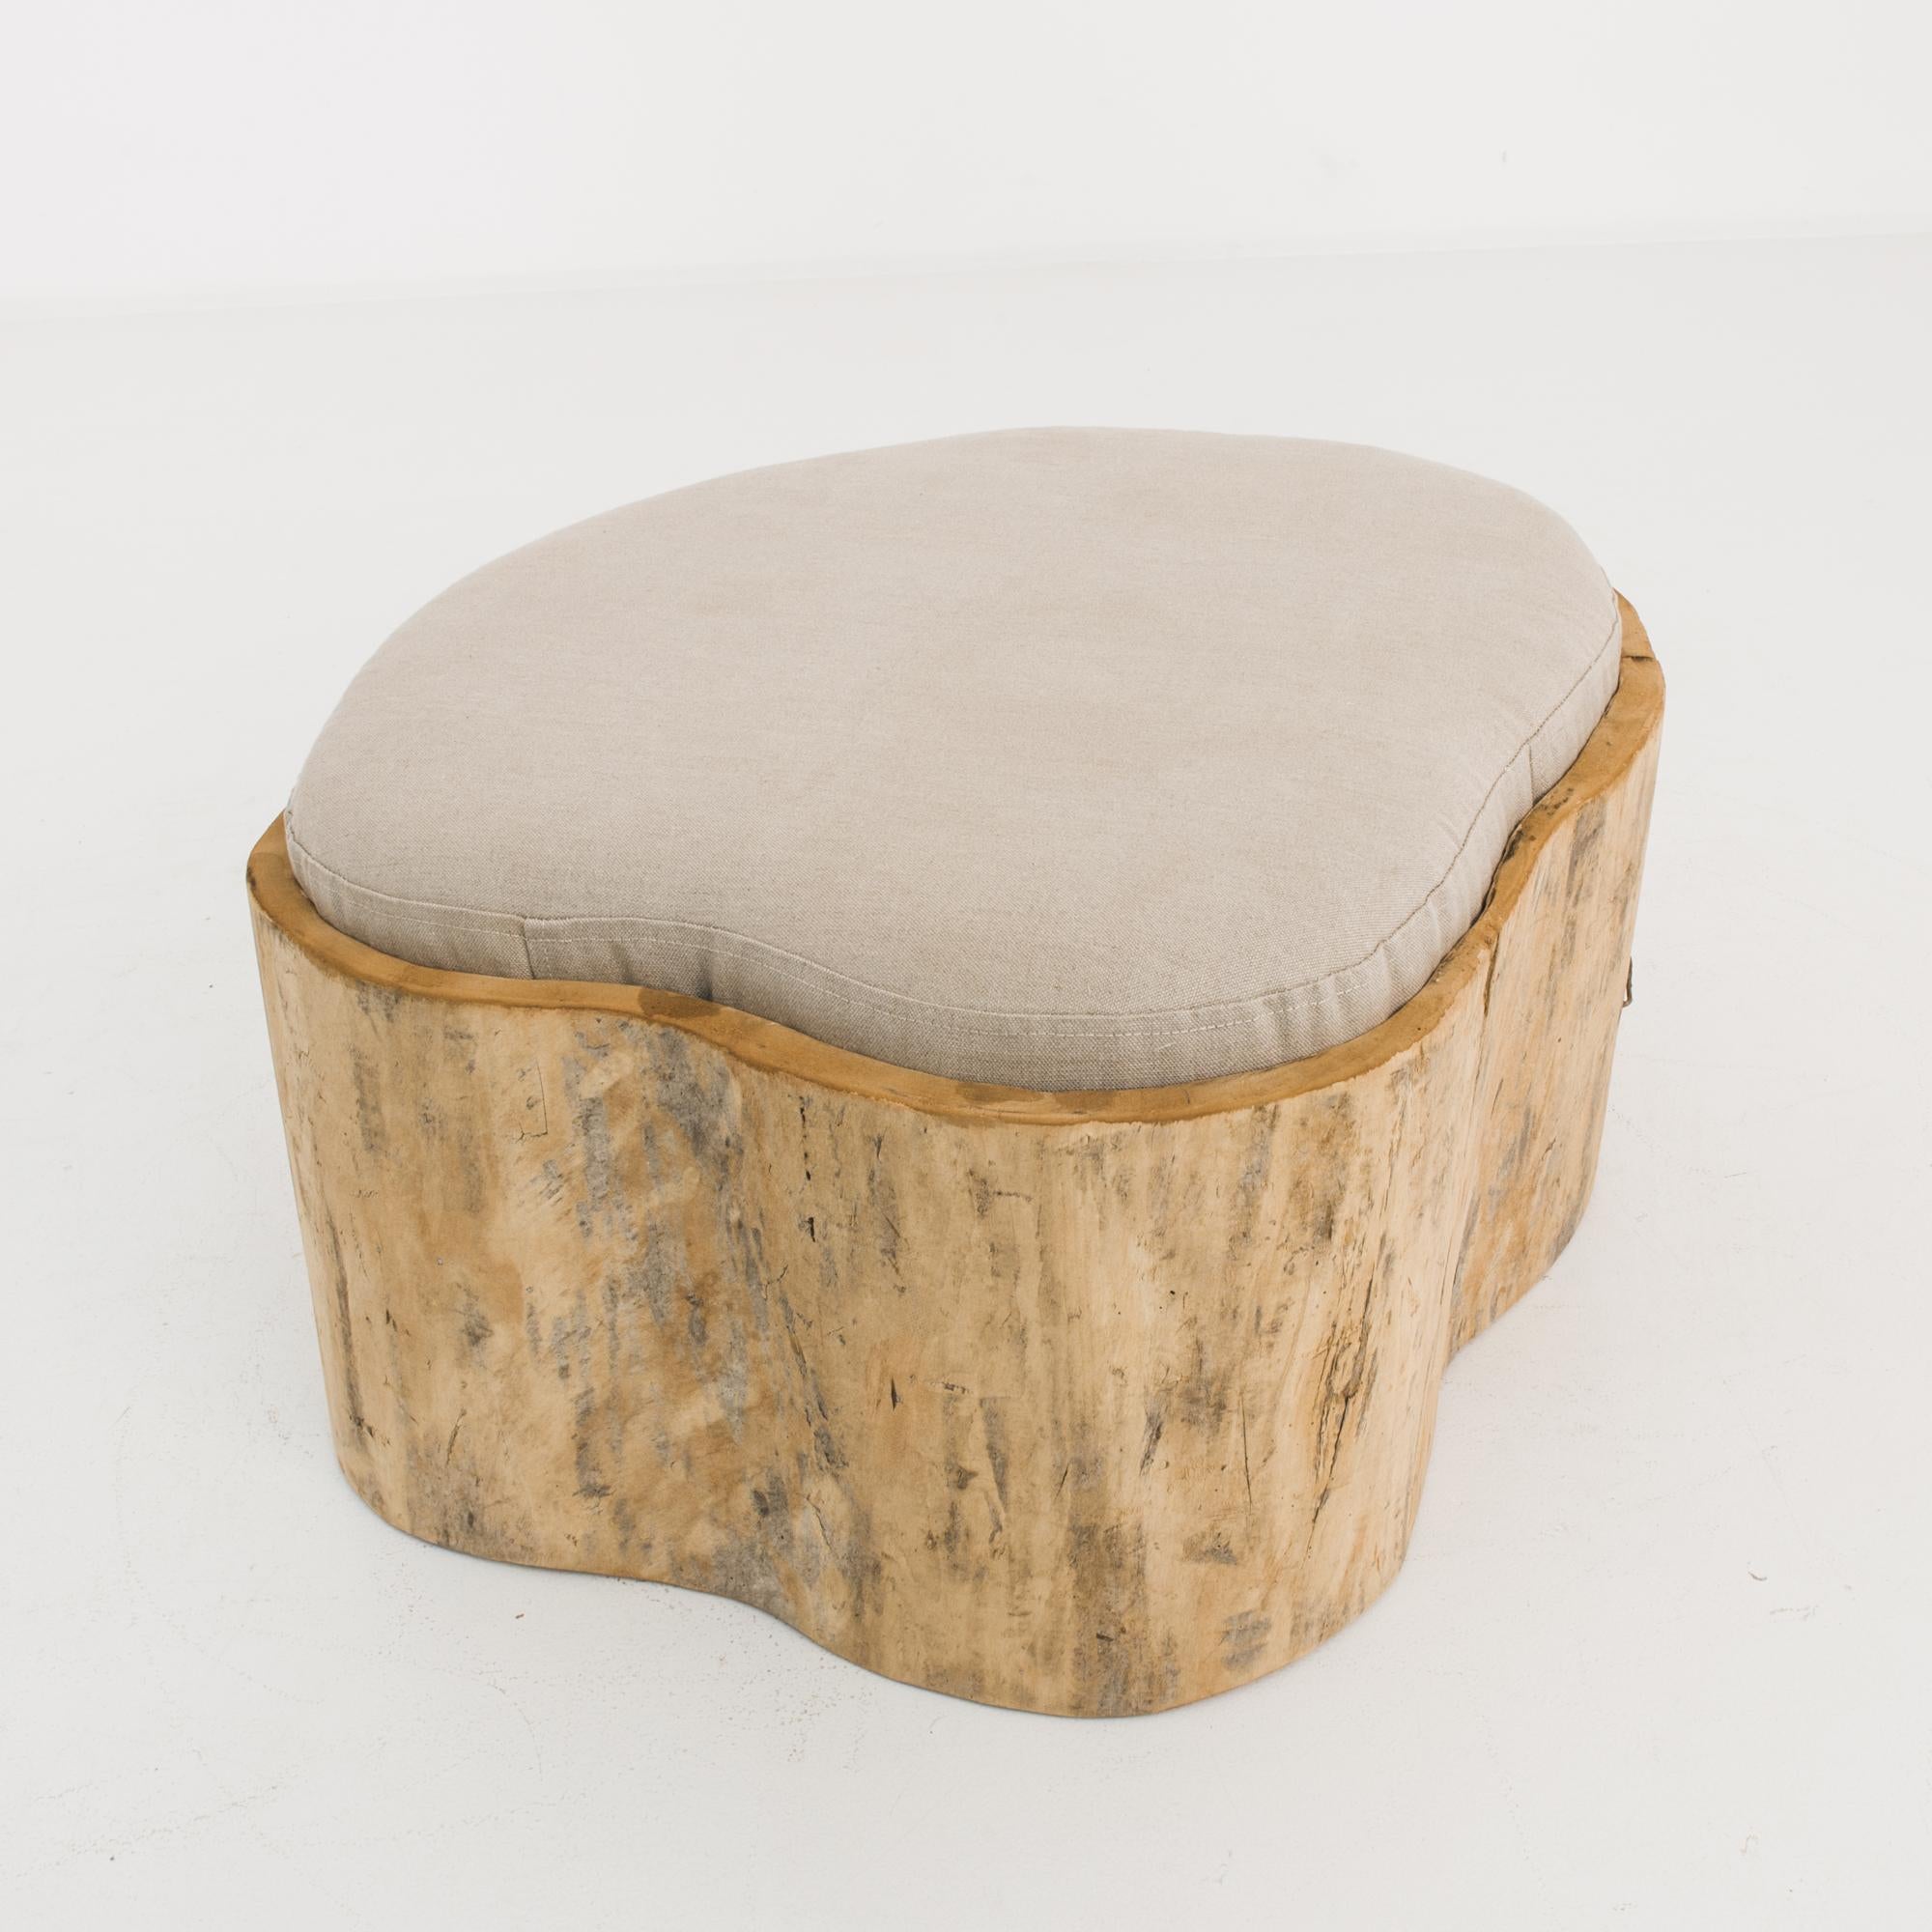 Polish 1800s Central European Tree-Stump Pouf with Upholstered Seat